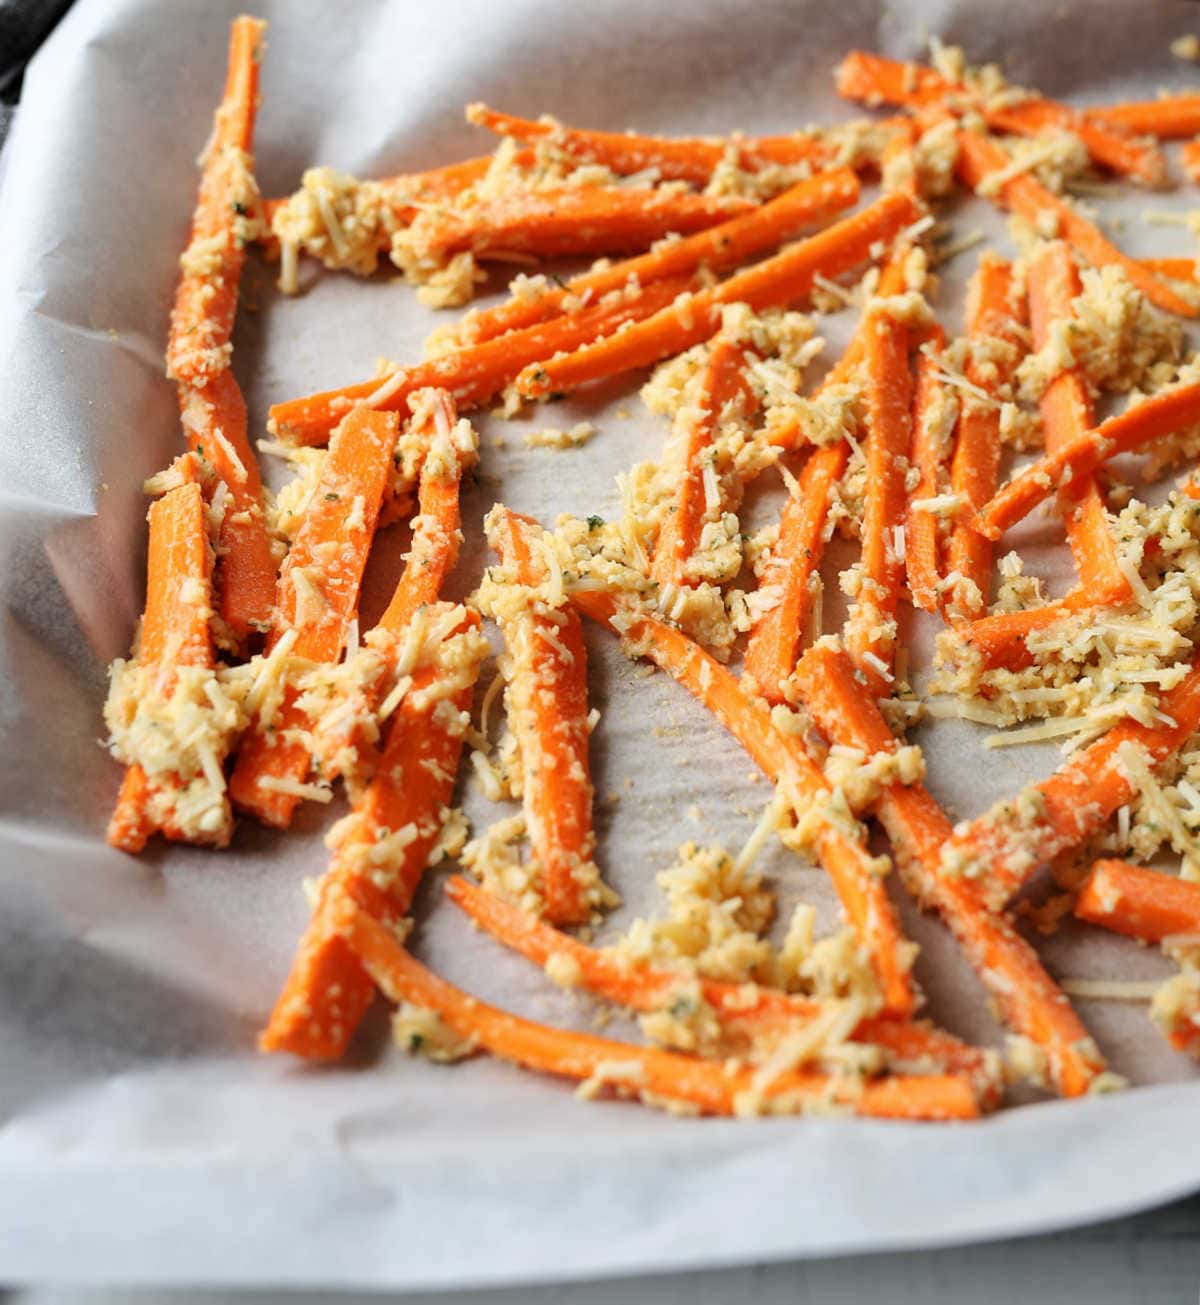 Baked Parmesan Carrot Fries prepared on a baking sheet lined with parchment paper